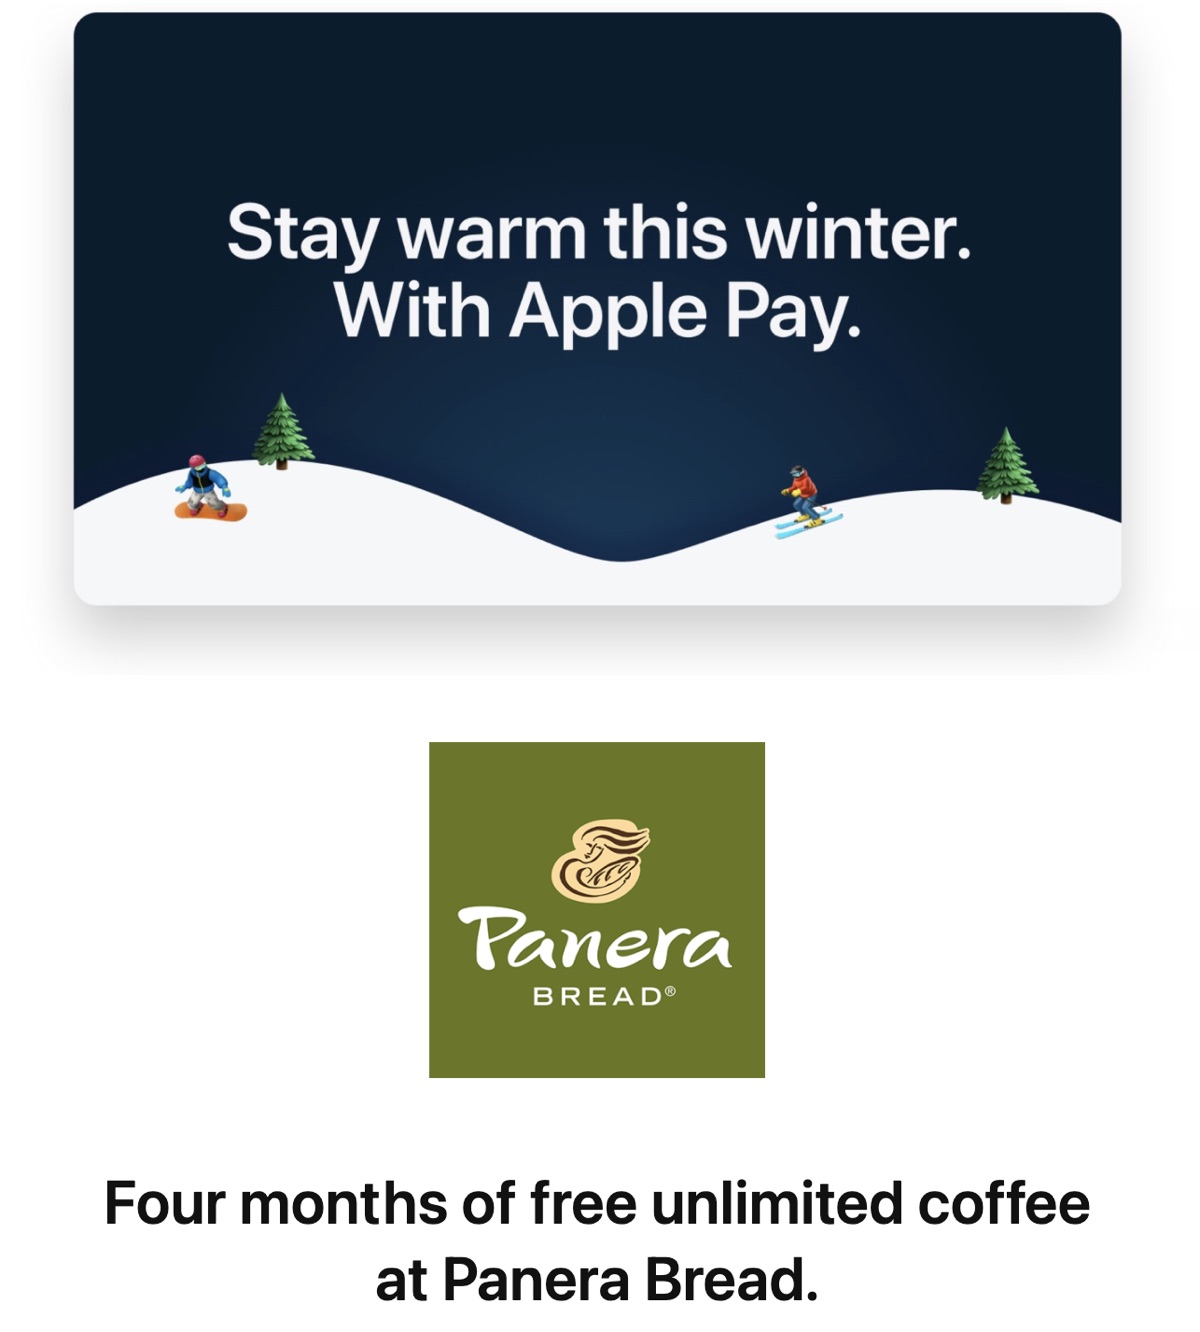 Apple Pay Promo Offers Four Months of Free Coffee From Panera Bread ...